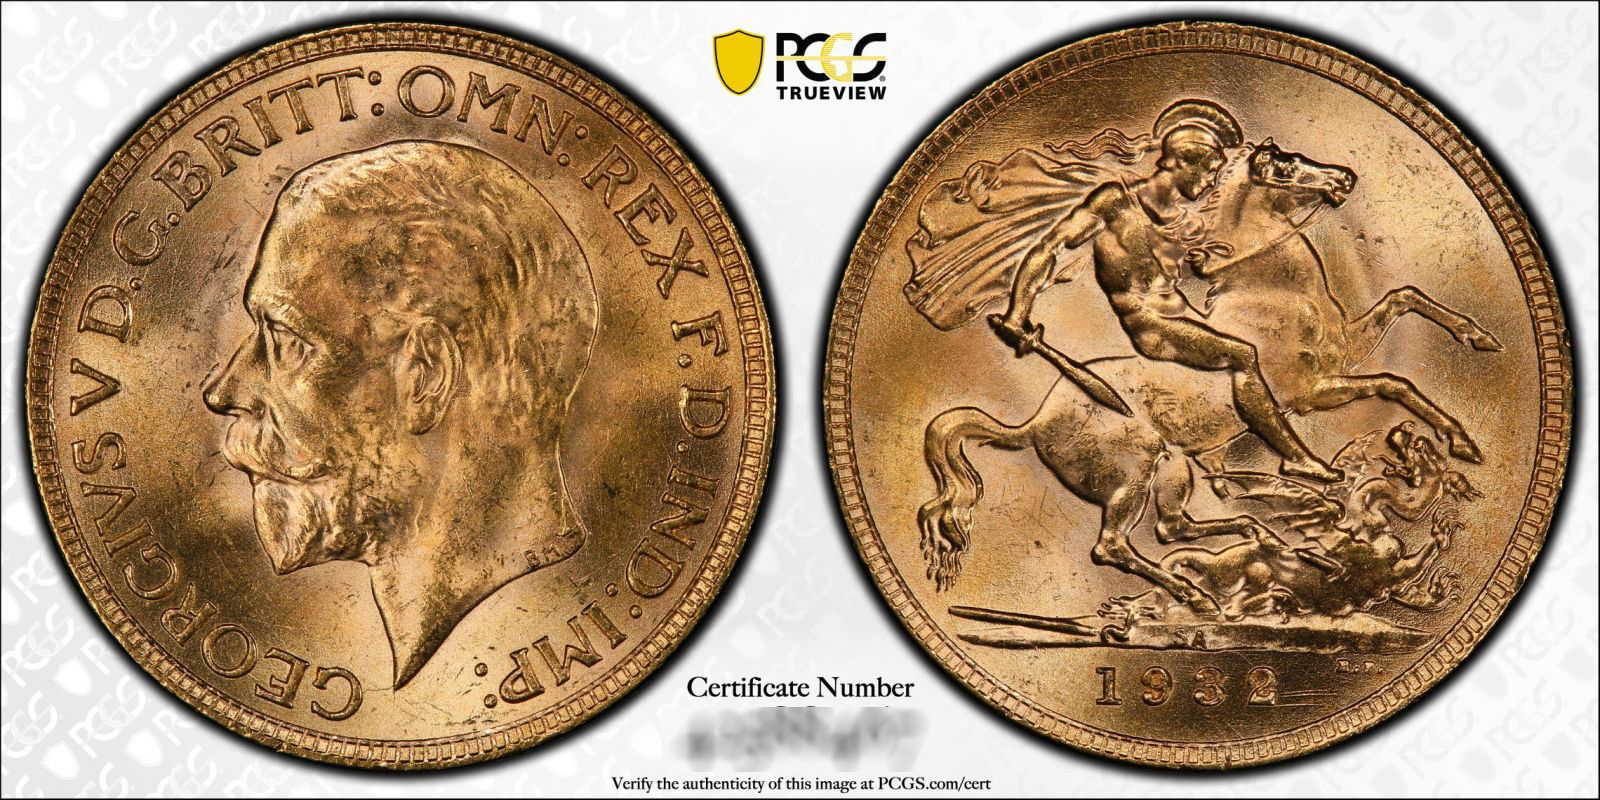 A 1932 George V South African sovereign gold coin showing George V facing left and St George and the Dragon on the reverse